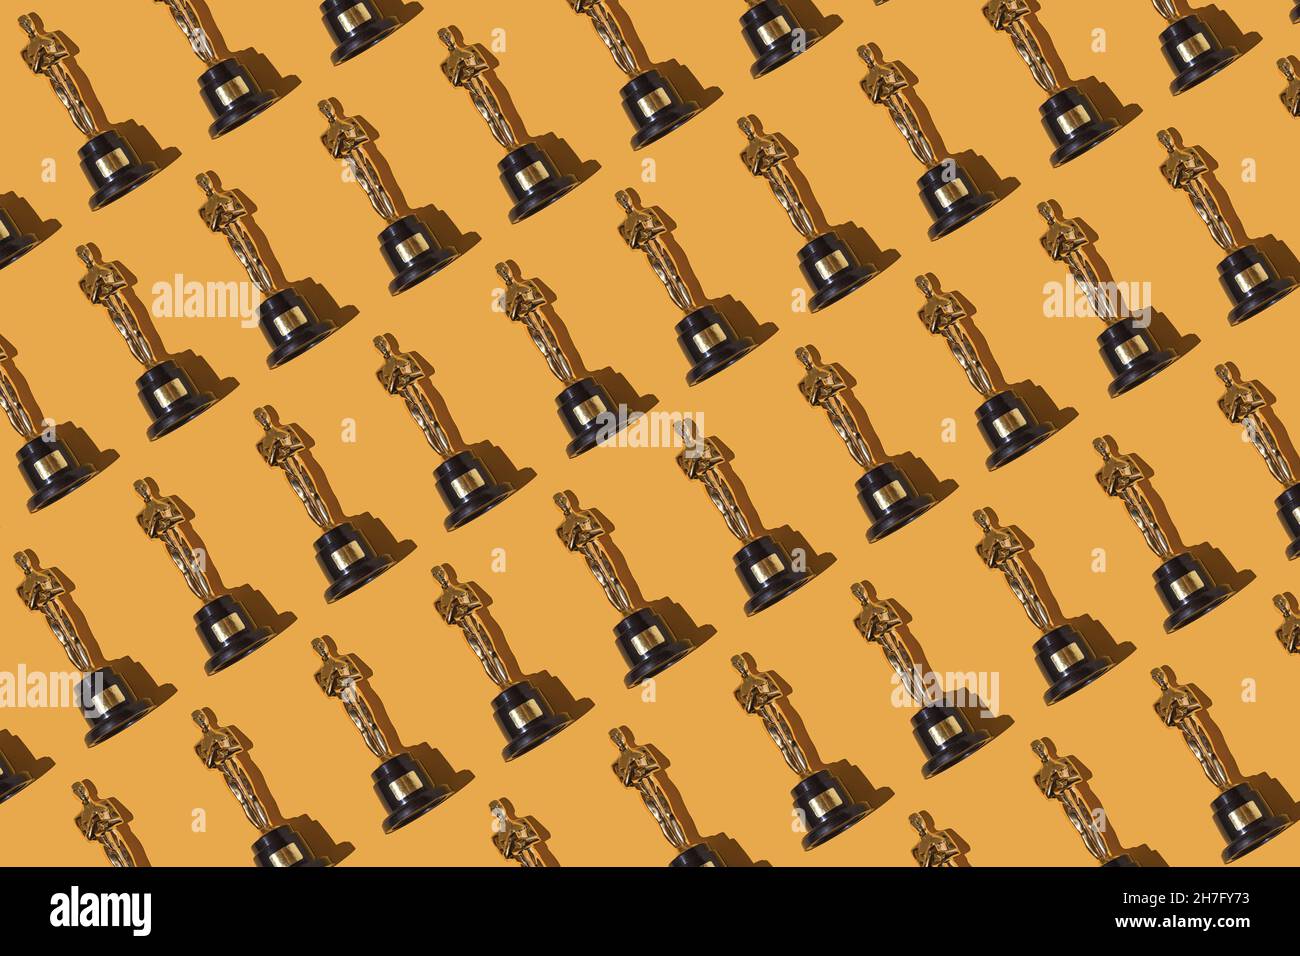 Oscar awards trophy pattern on yellow background. Award, film industry, Hollywood and winner concept. Stock Photo